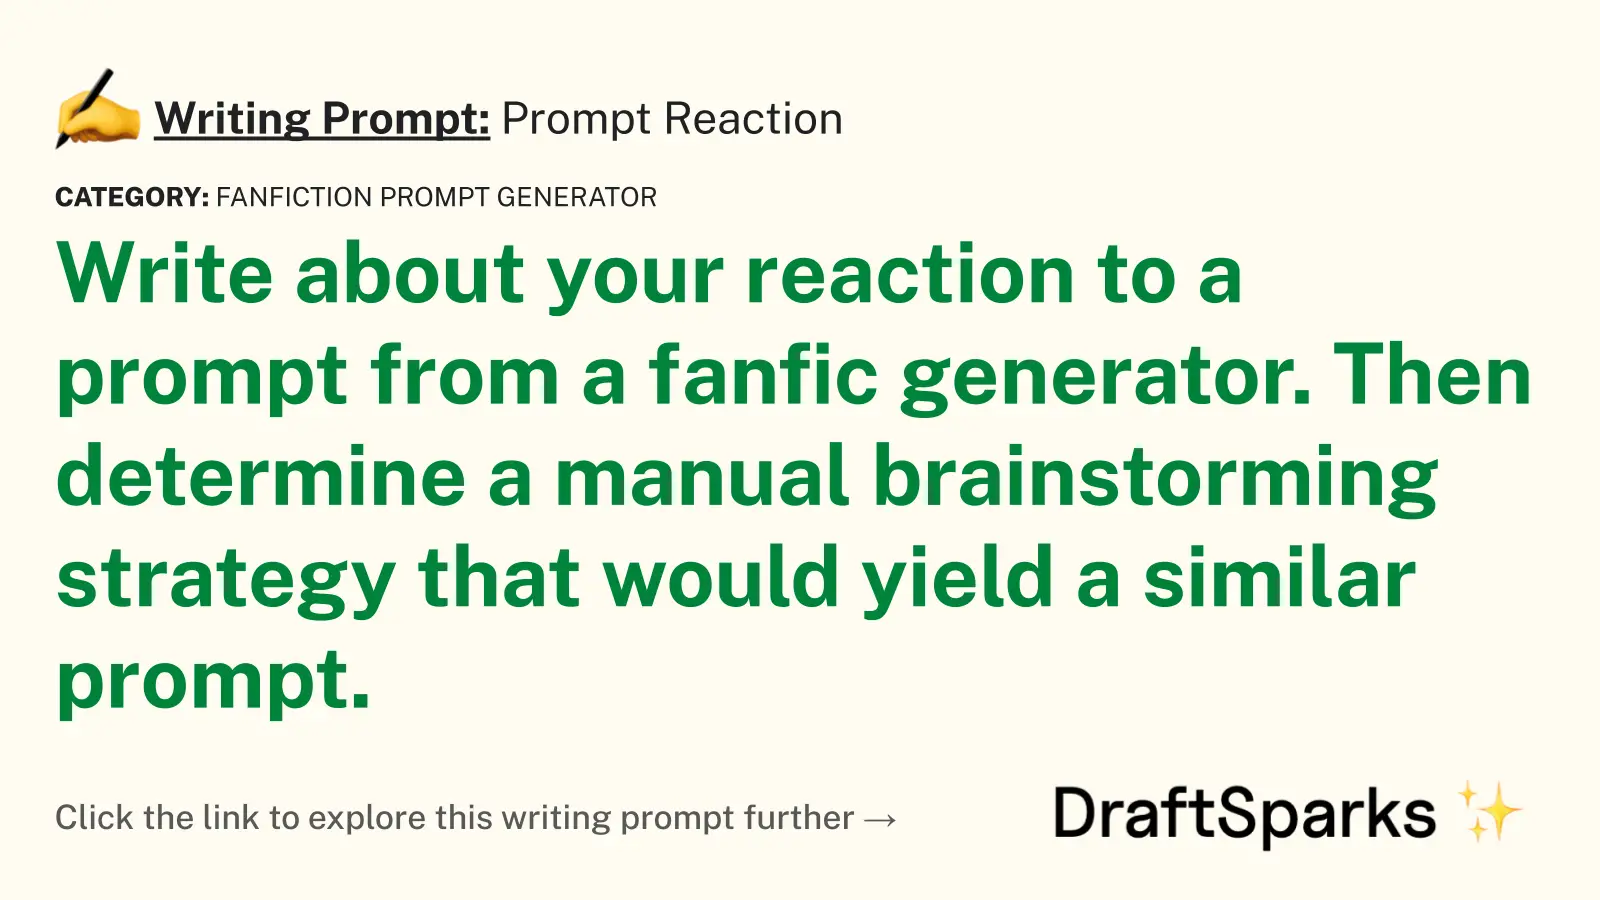 Prompt Reaction